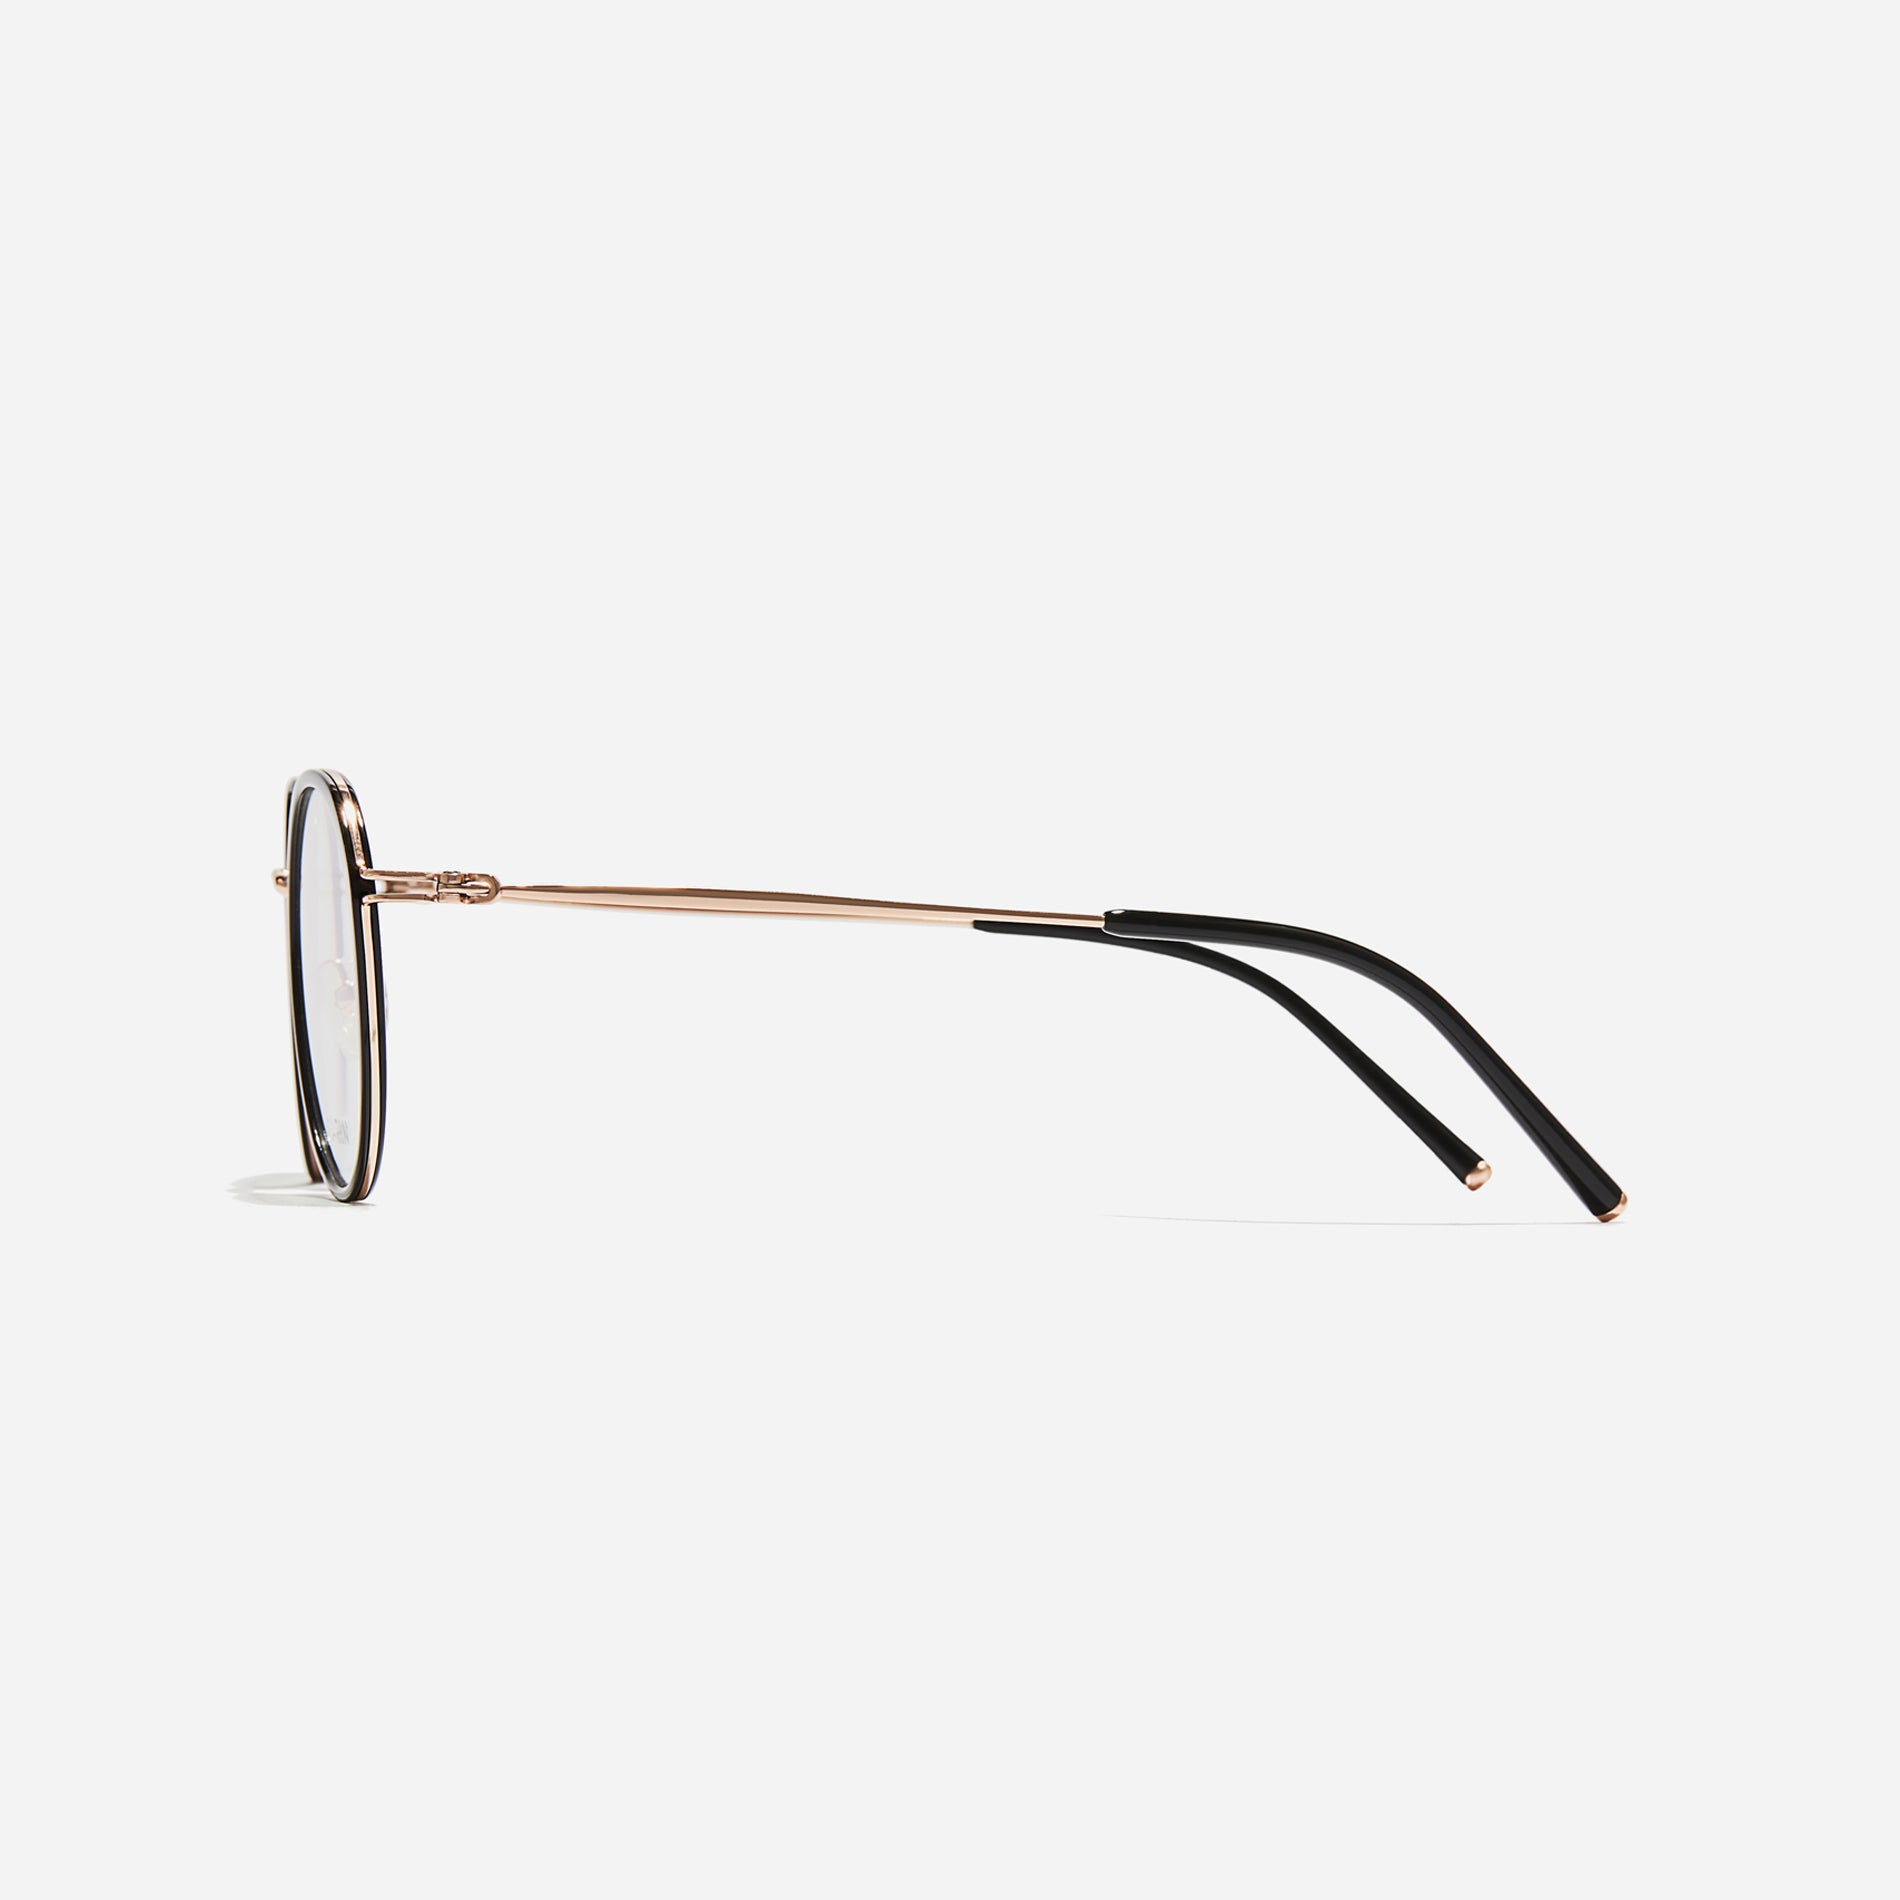 Polygonal-shaped eyeglasses that feature a contrasting round lens design, offering a smooth yet refined style.  They provide a comfortable wearing experience with slim temples made from lightweight and elastic B-Titanium material.